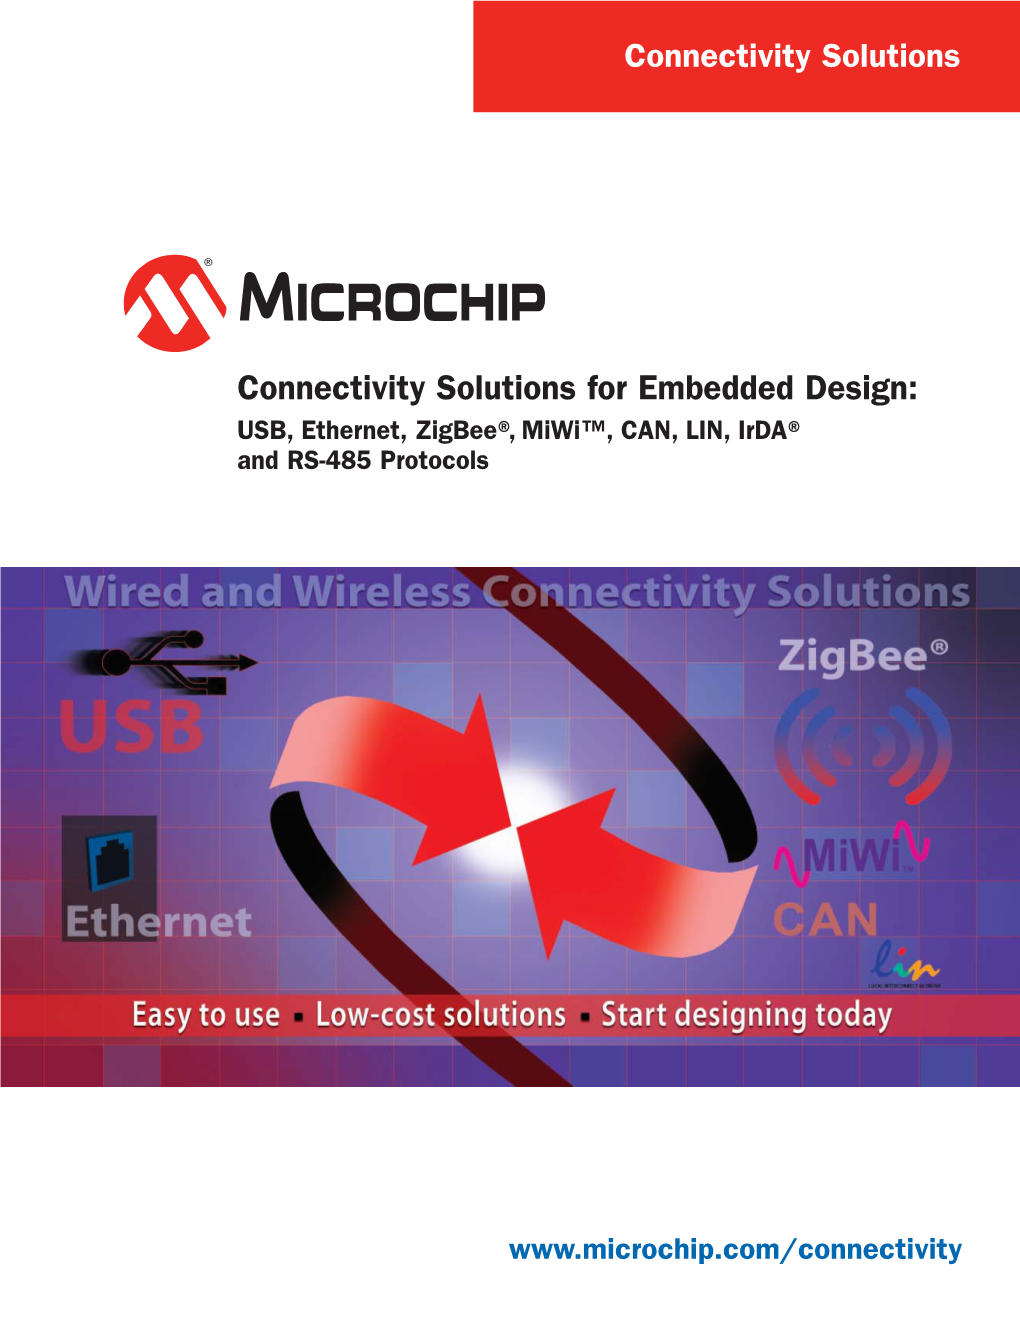 Connectivity Solutions for Embedded Design: USB, Ethernet, Zigbee®, Miwi™, CAN, LIN, Irda® and RS-485 Protocols